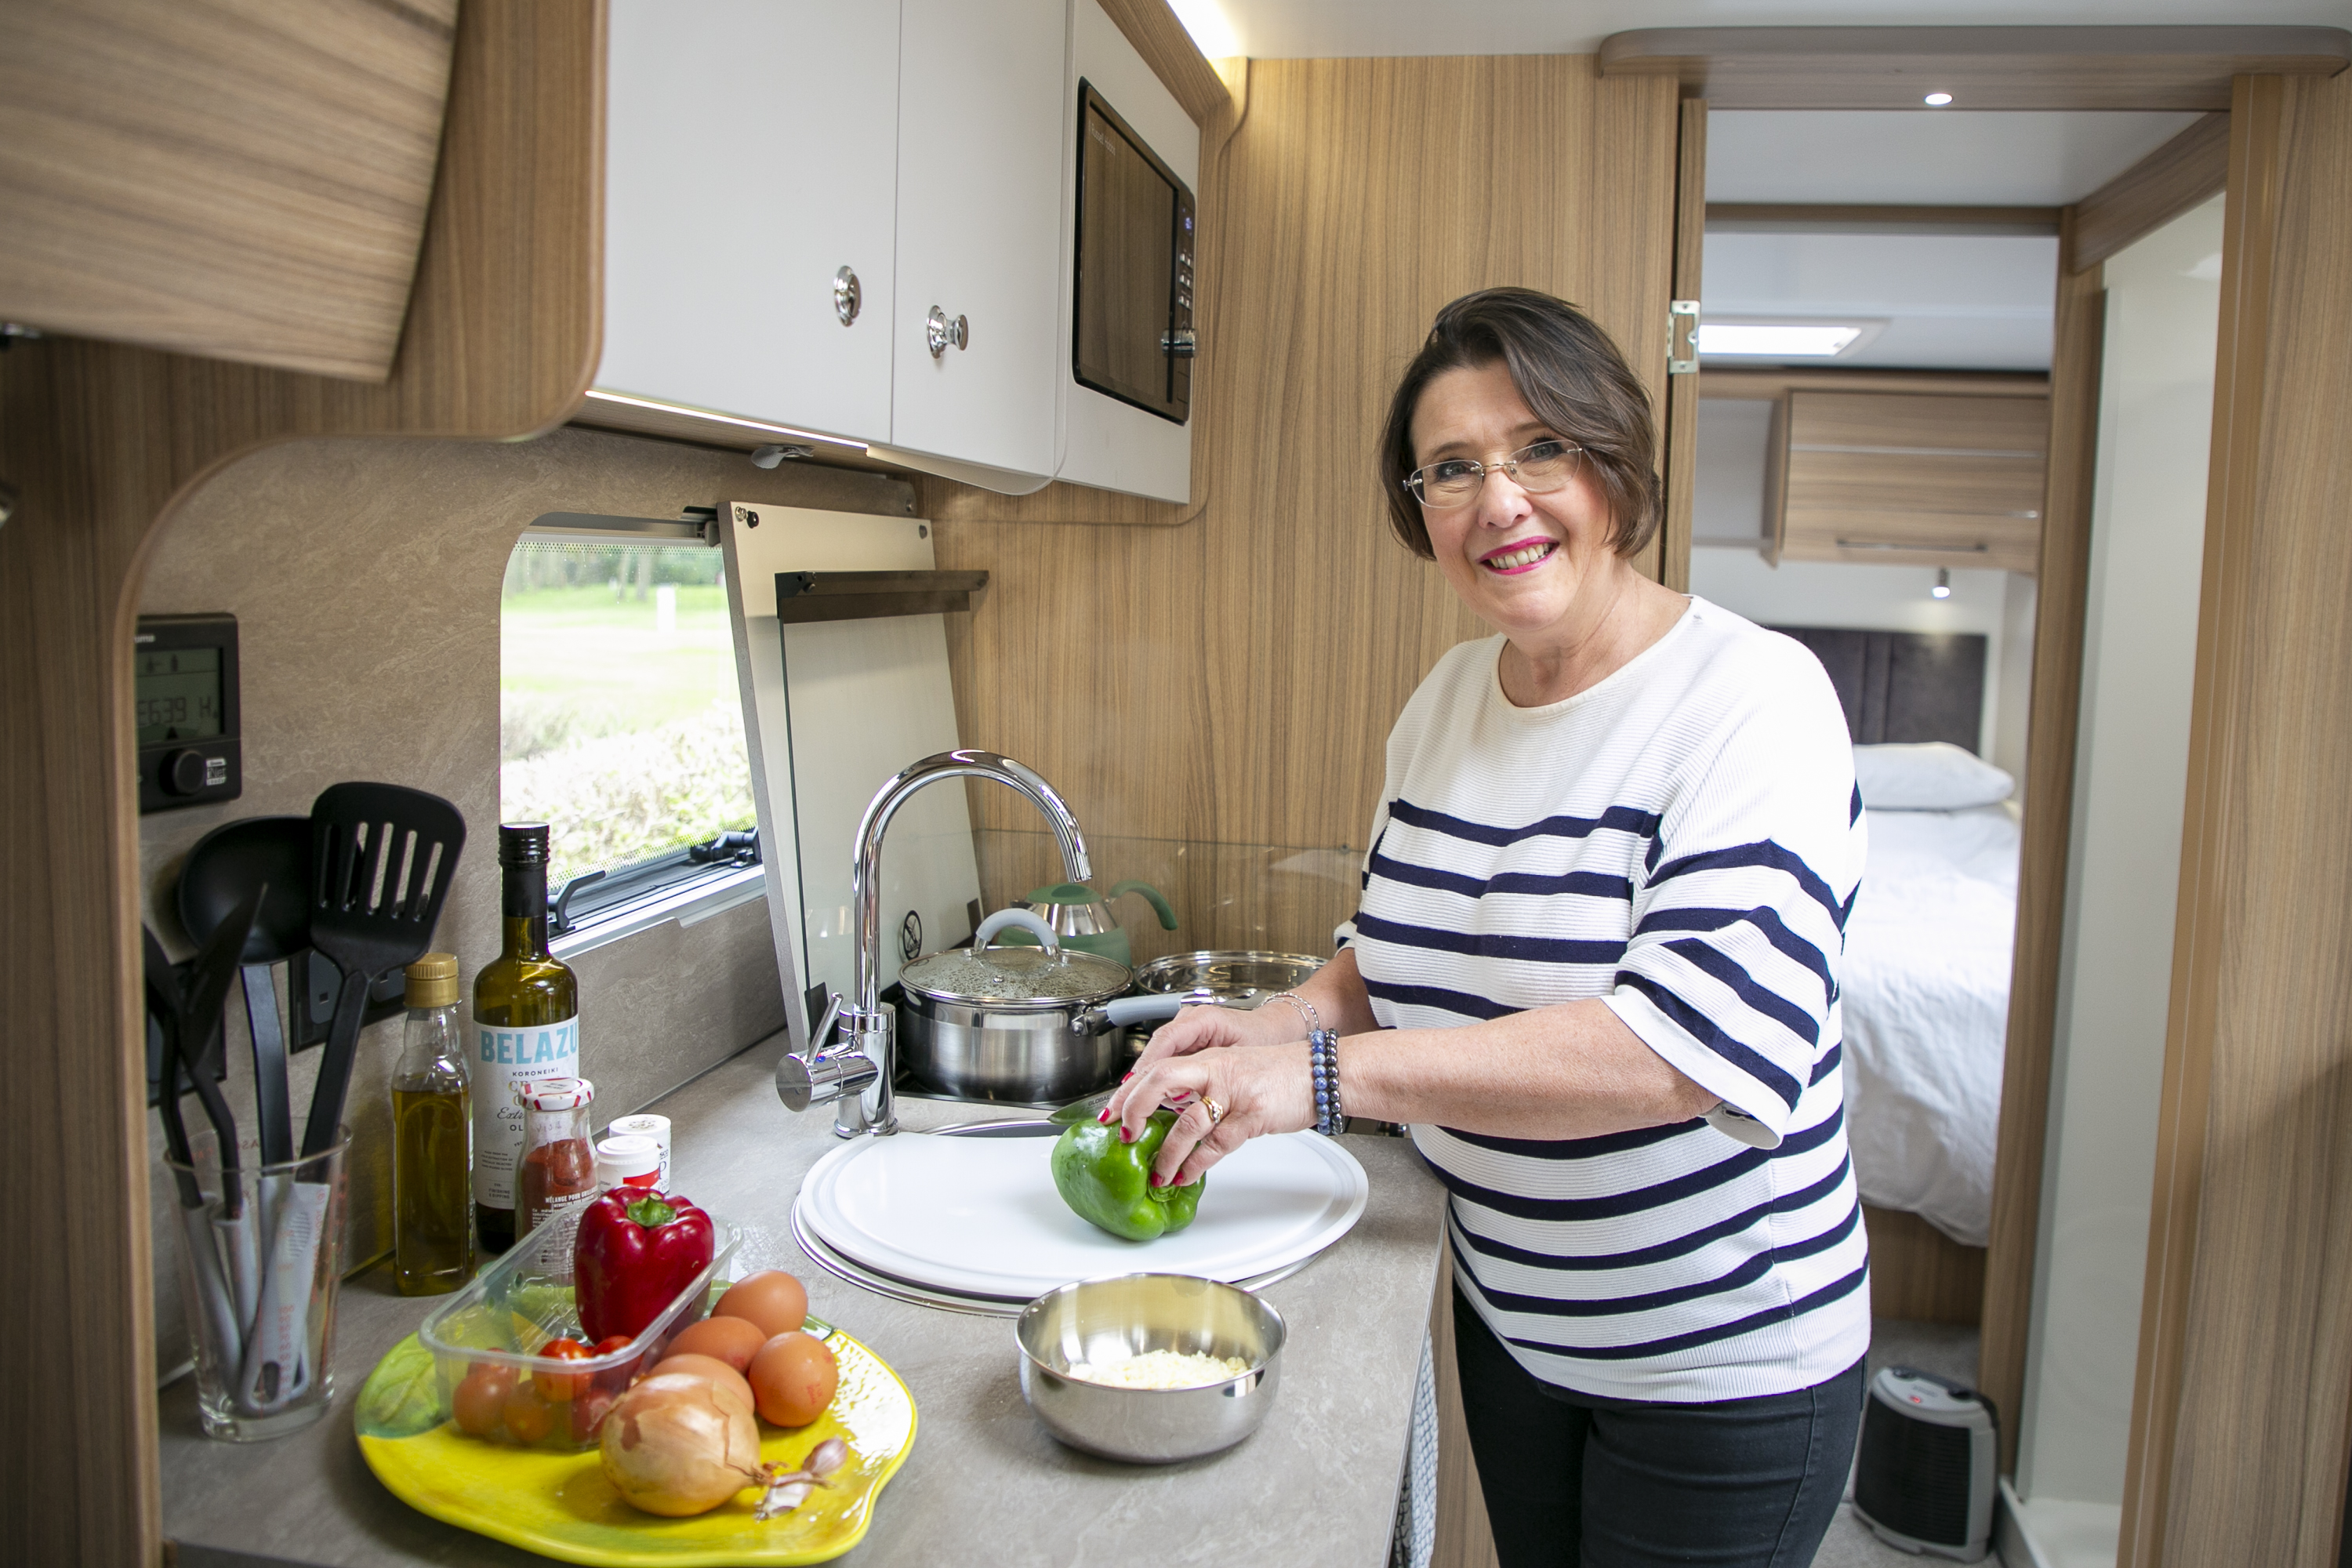 Caravan kitchens are very small spaces, but Lisa shows you how to make it work for you